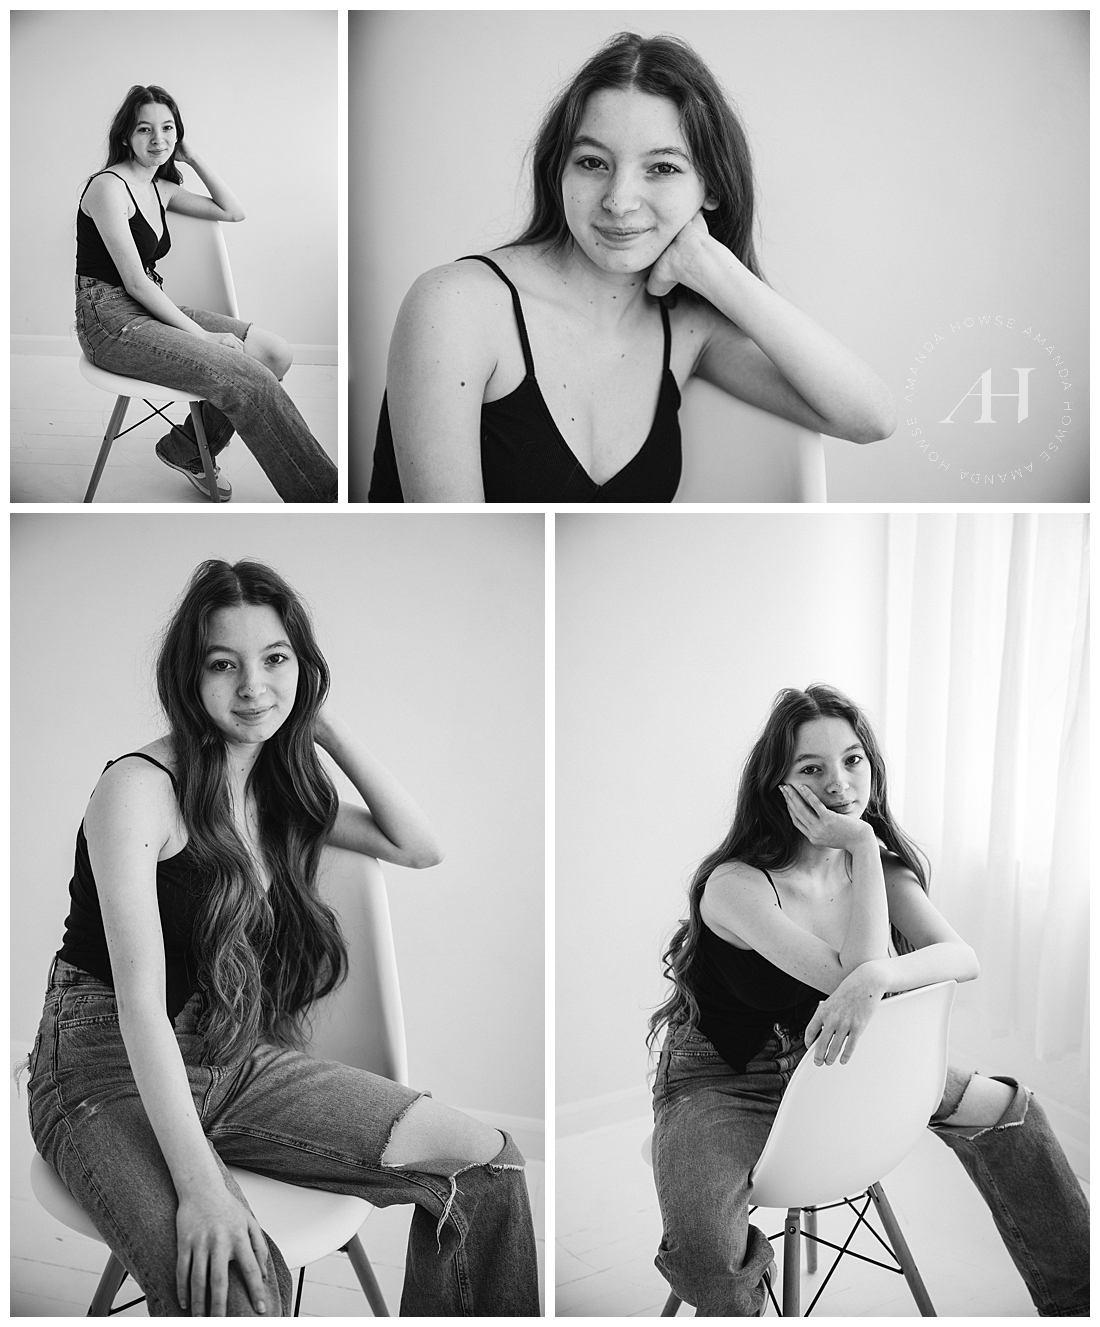 Portraits at Studio 253 in Tacoma, Washington | Amanda Howse Photography | Project Beauty Campaign for High School Seniors to Feel Confident and Empowered